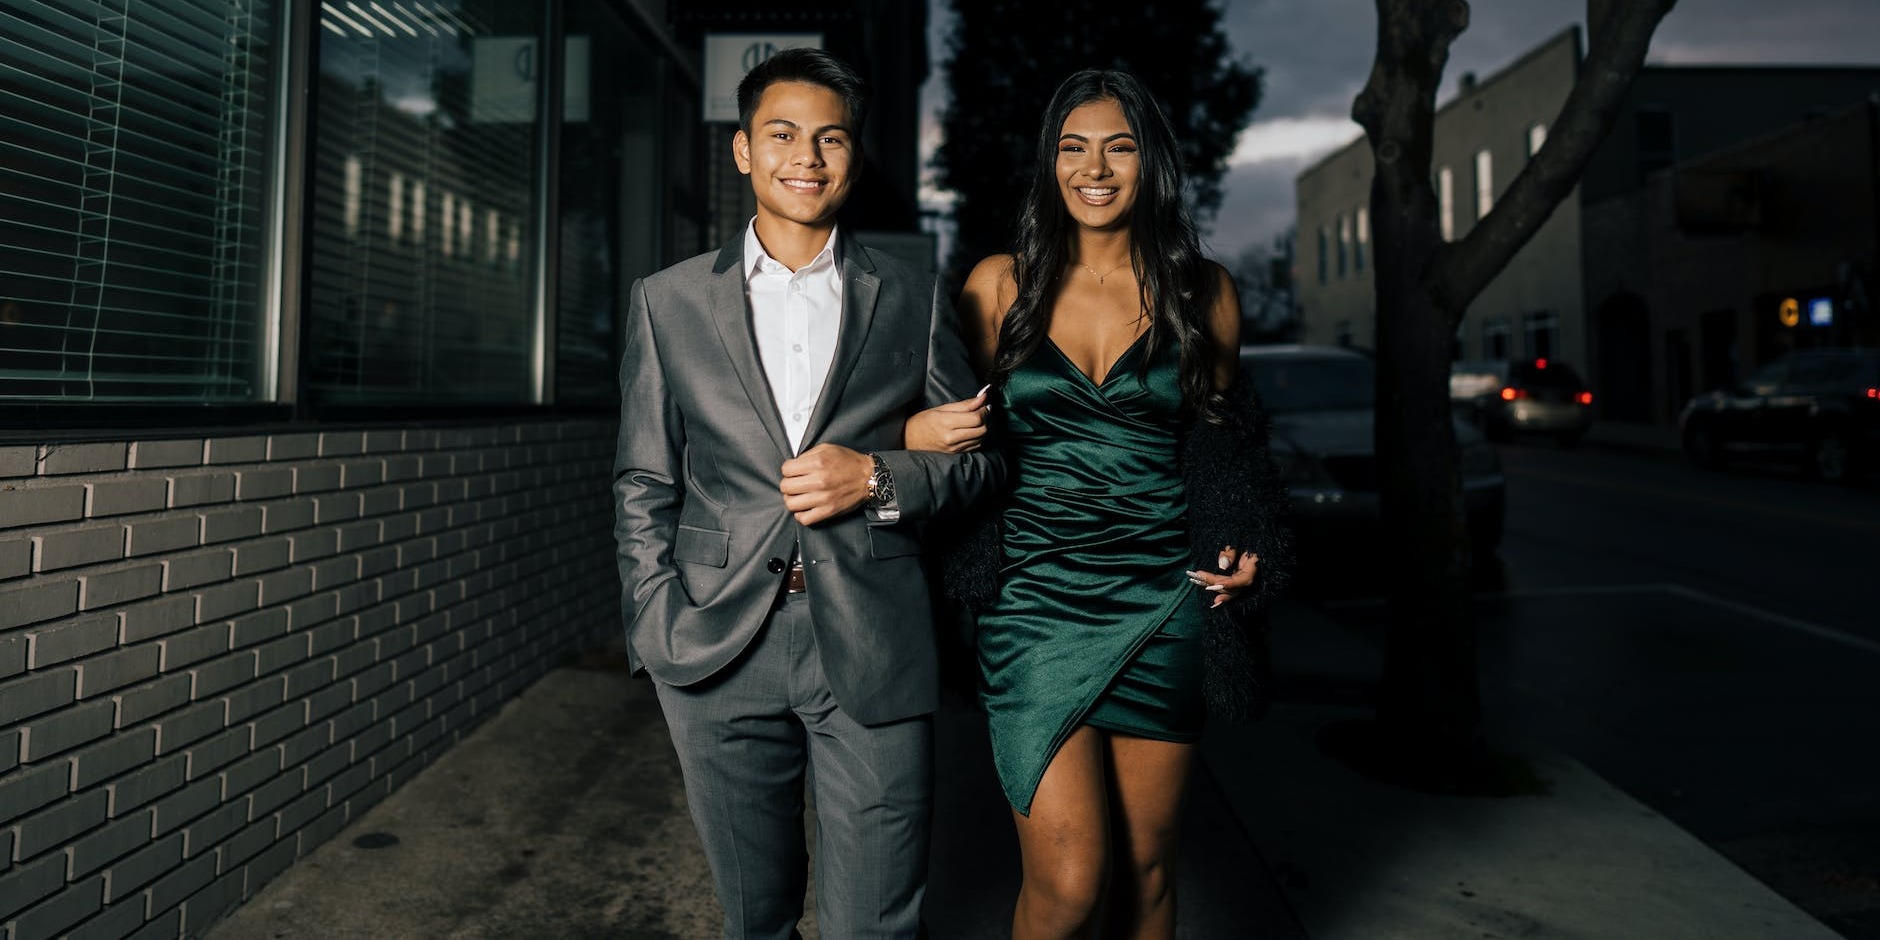 5 Top Tips for Choosing Your Perfect Prom Transport